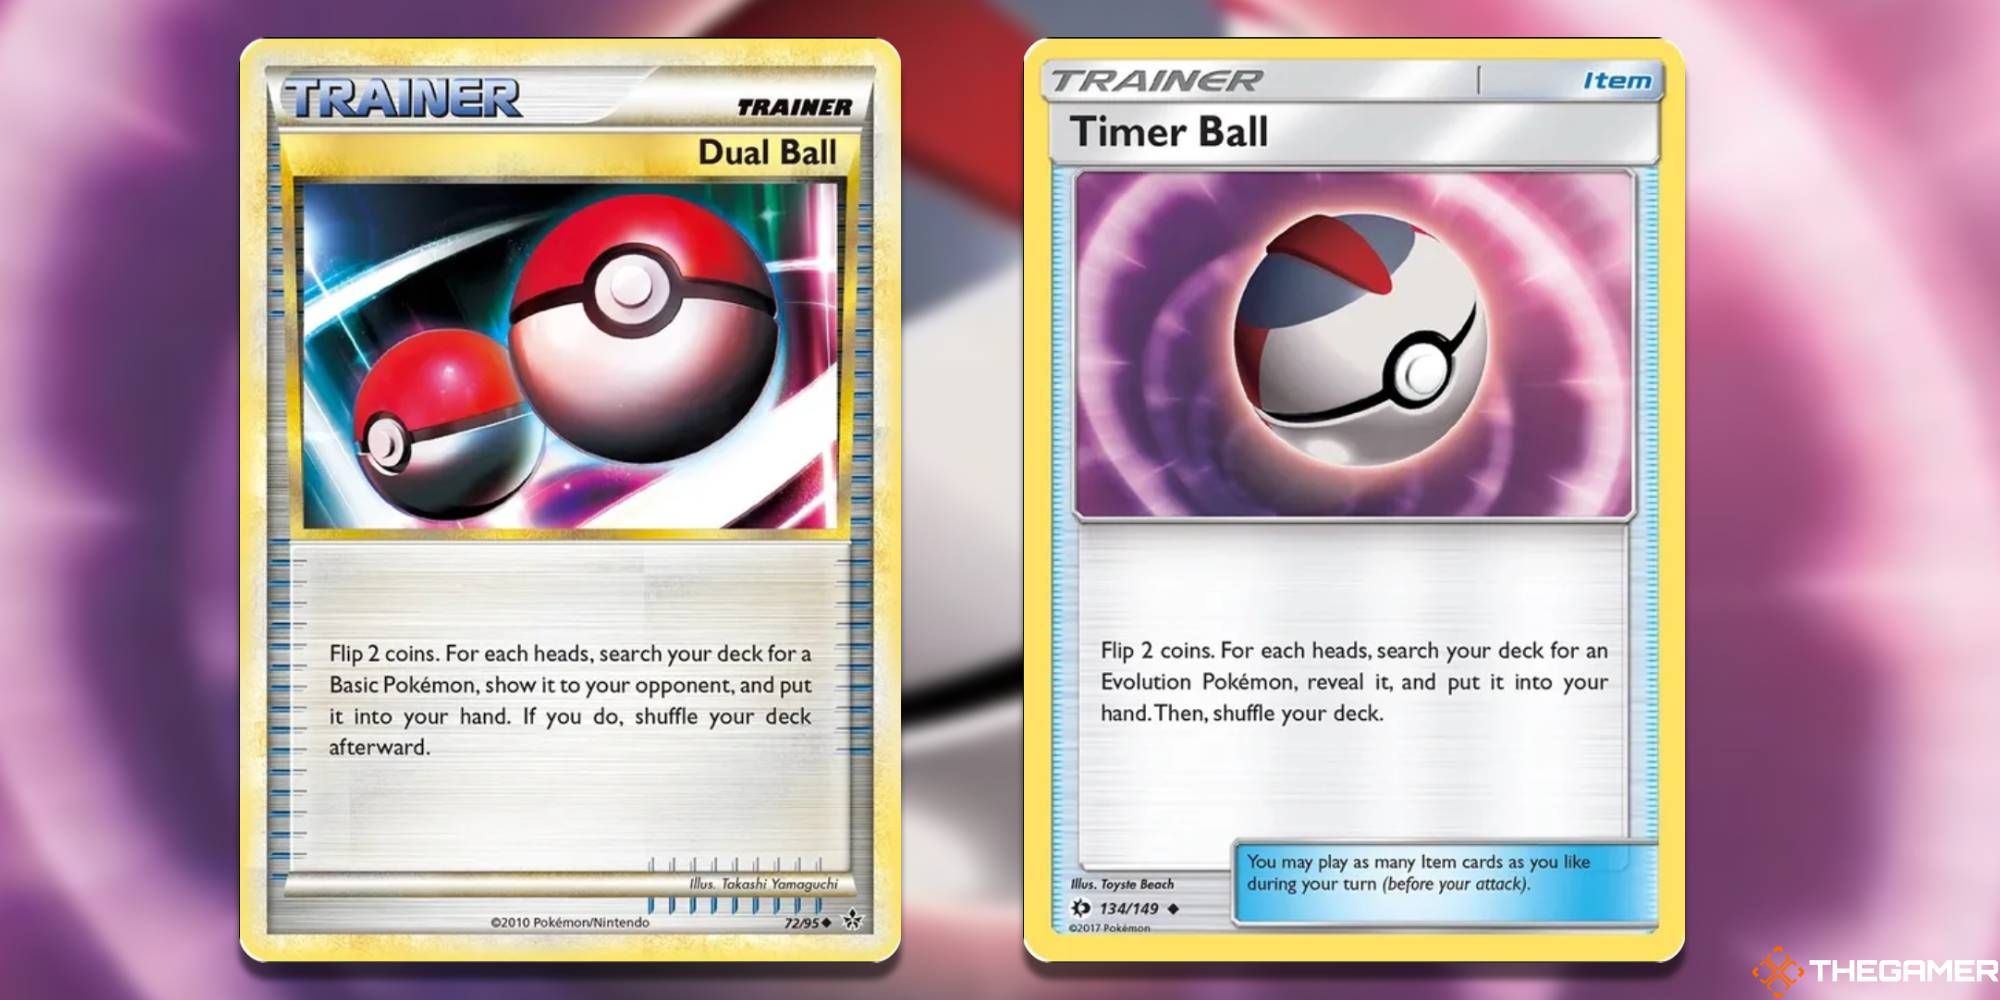 Dual Ball & Timer Ball from the Pokemon TCG, with blurred background